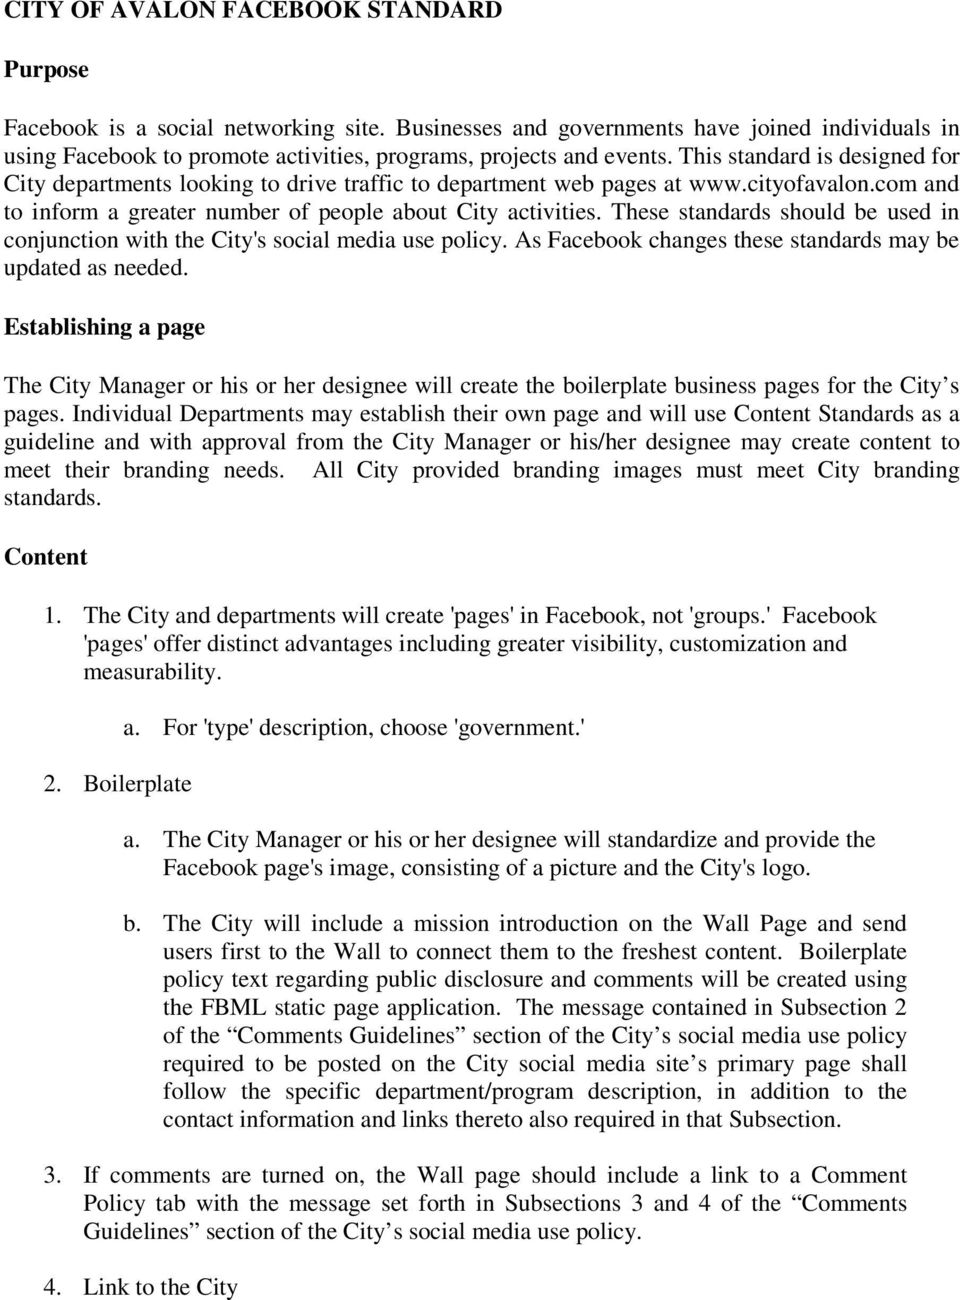 This standard is designed for City departments looking to drive traffic to department web pages at www.cityofavalon.com and to inform a greater number of people about City activities.